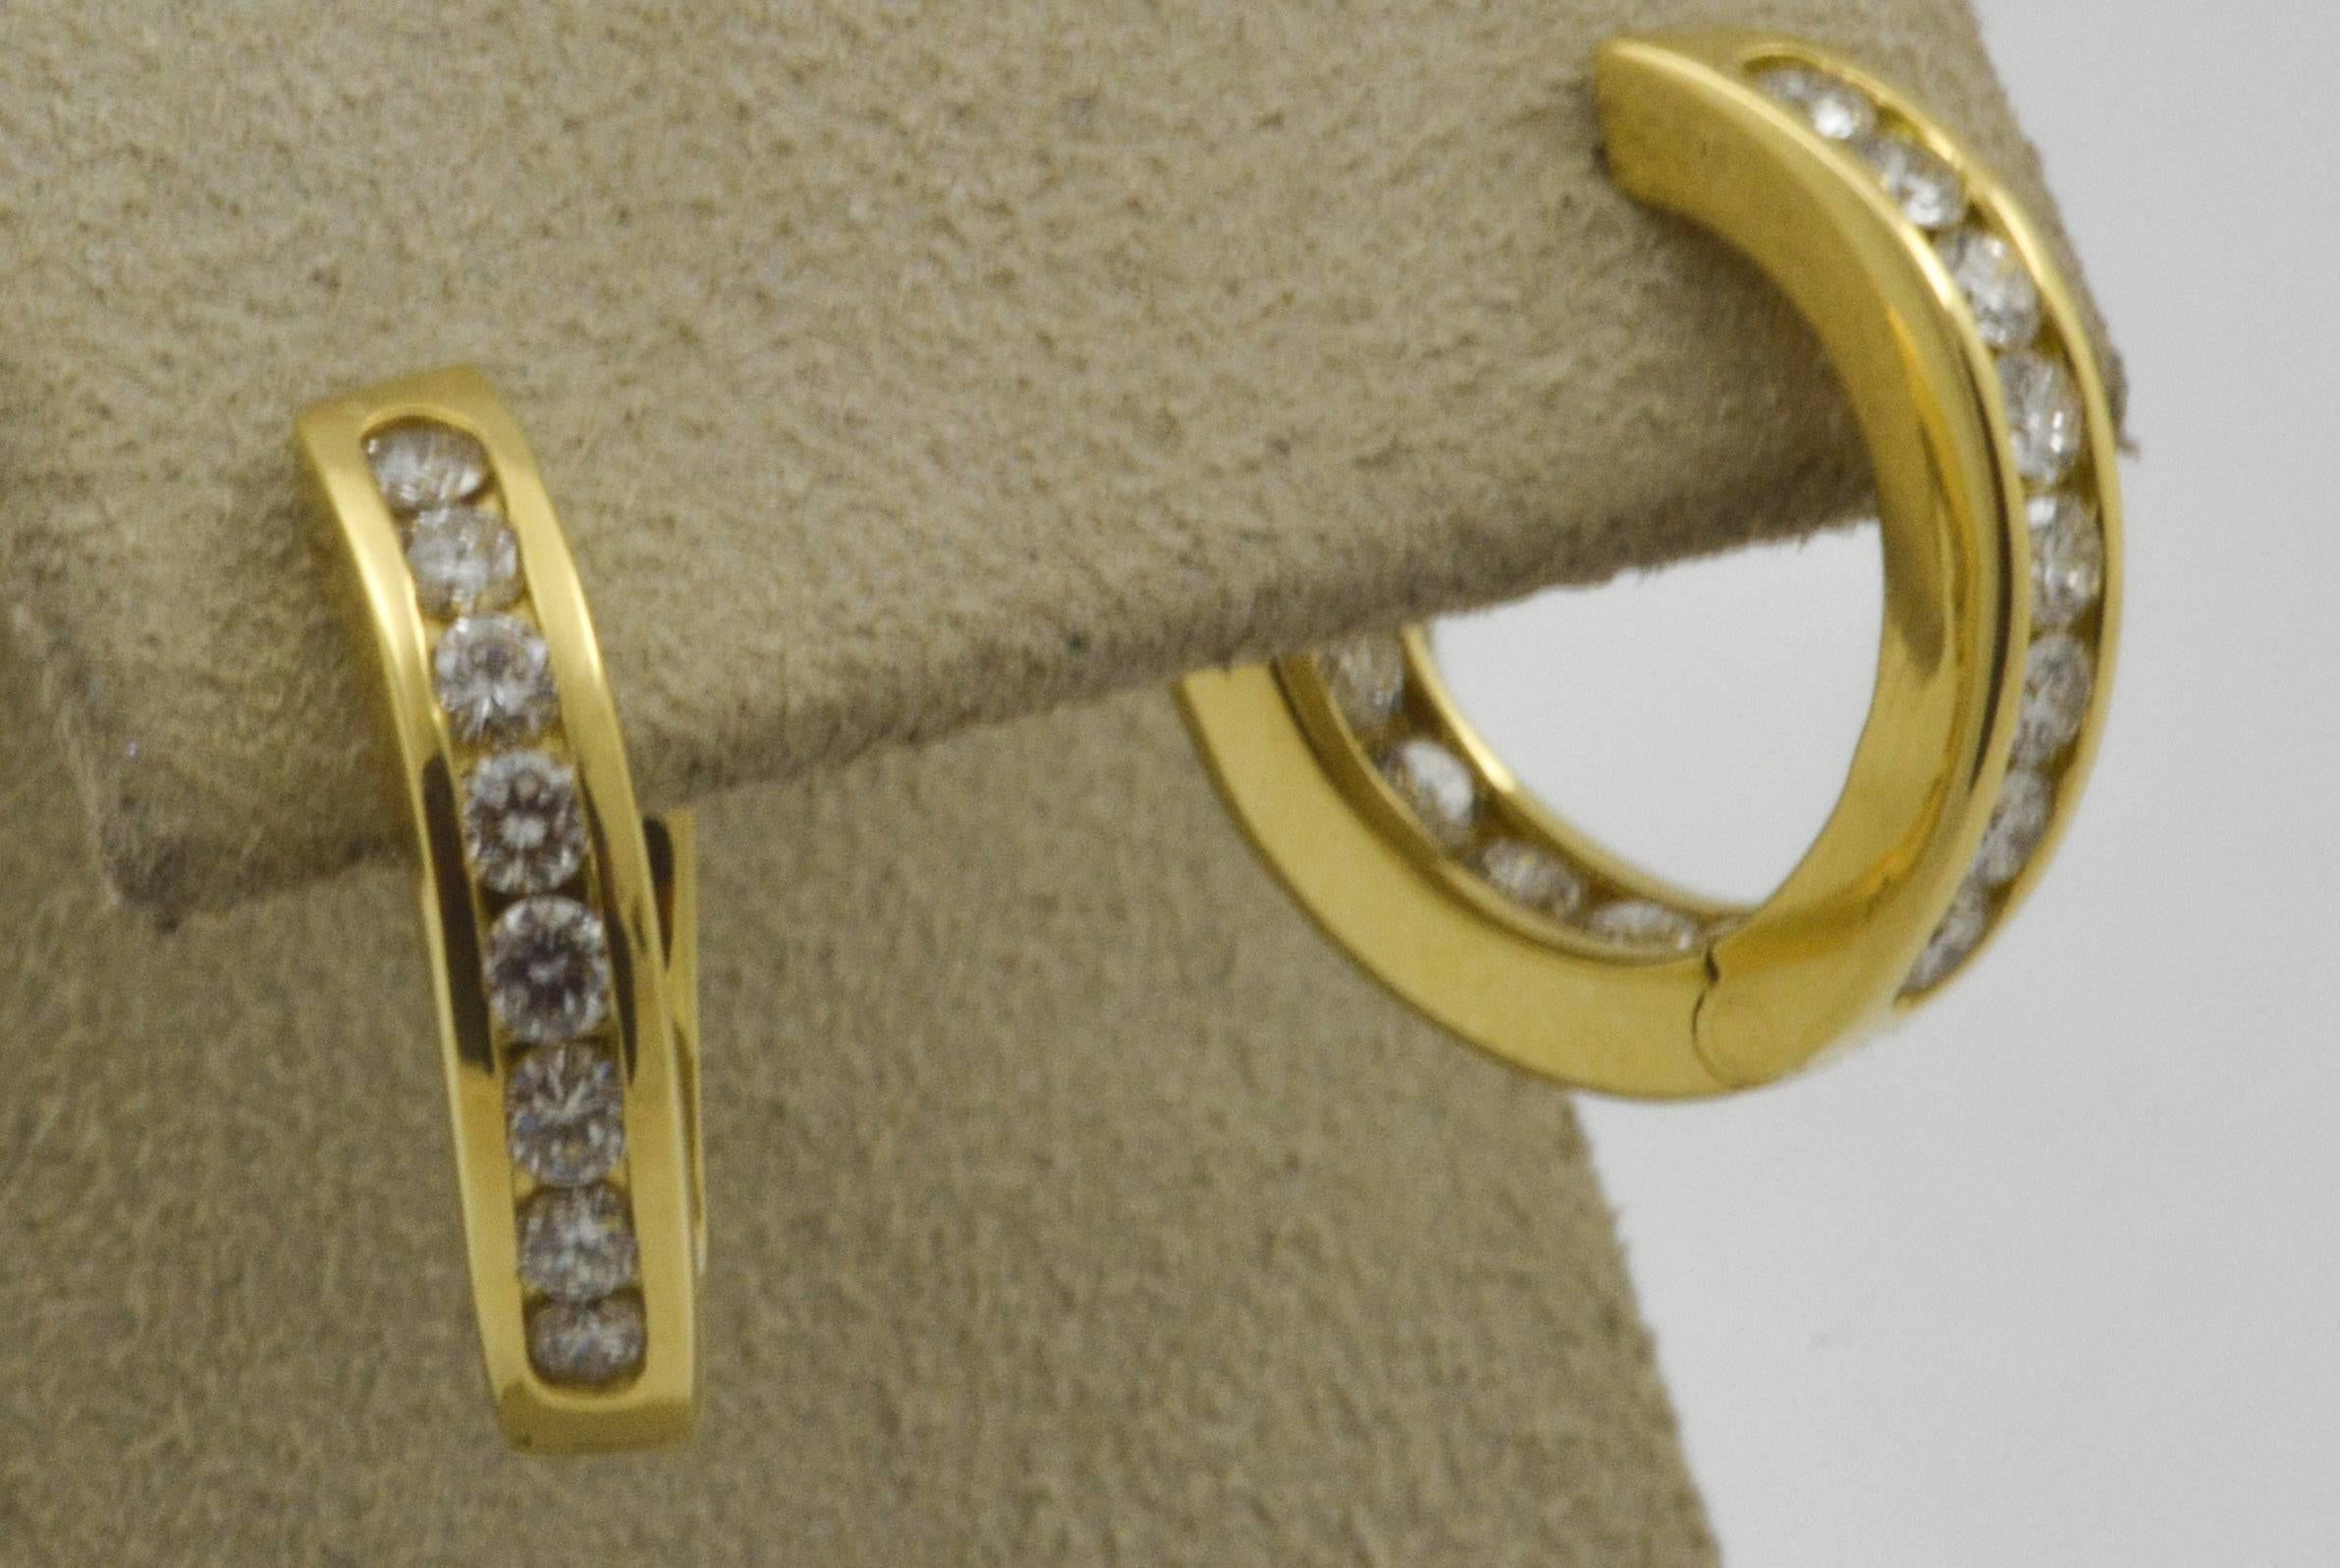 These classic 18kt yellow gold inside out diamond hoop earrings are each set with fourteen round, brilliant-cut diamonds in a channel setting style. With an approximate total weight of 0.24 carats (clarity VS color G), these earrings make a